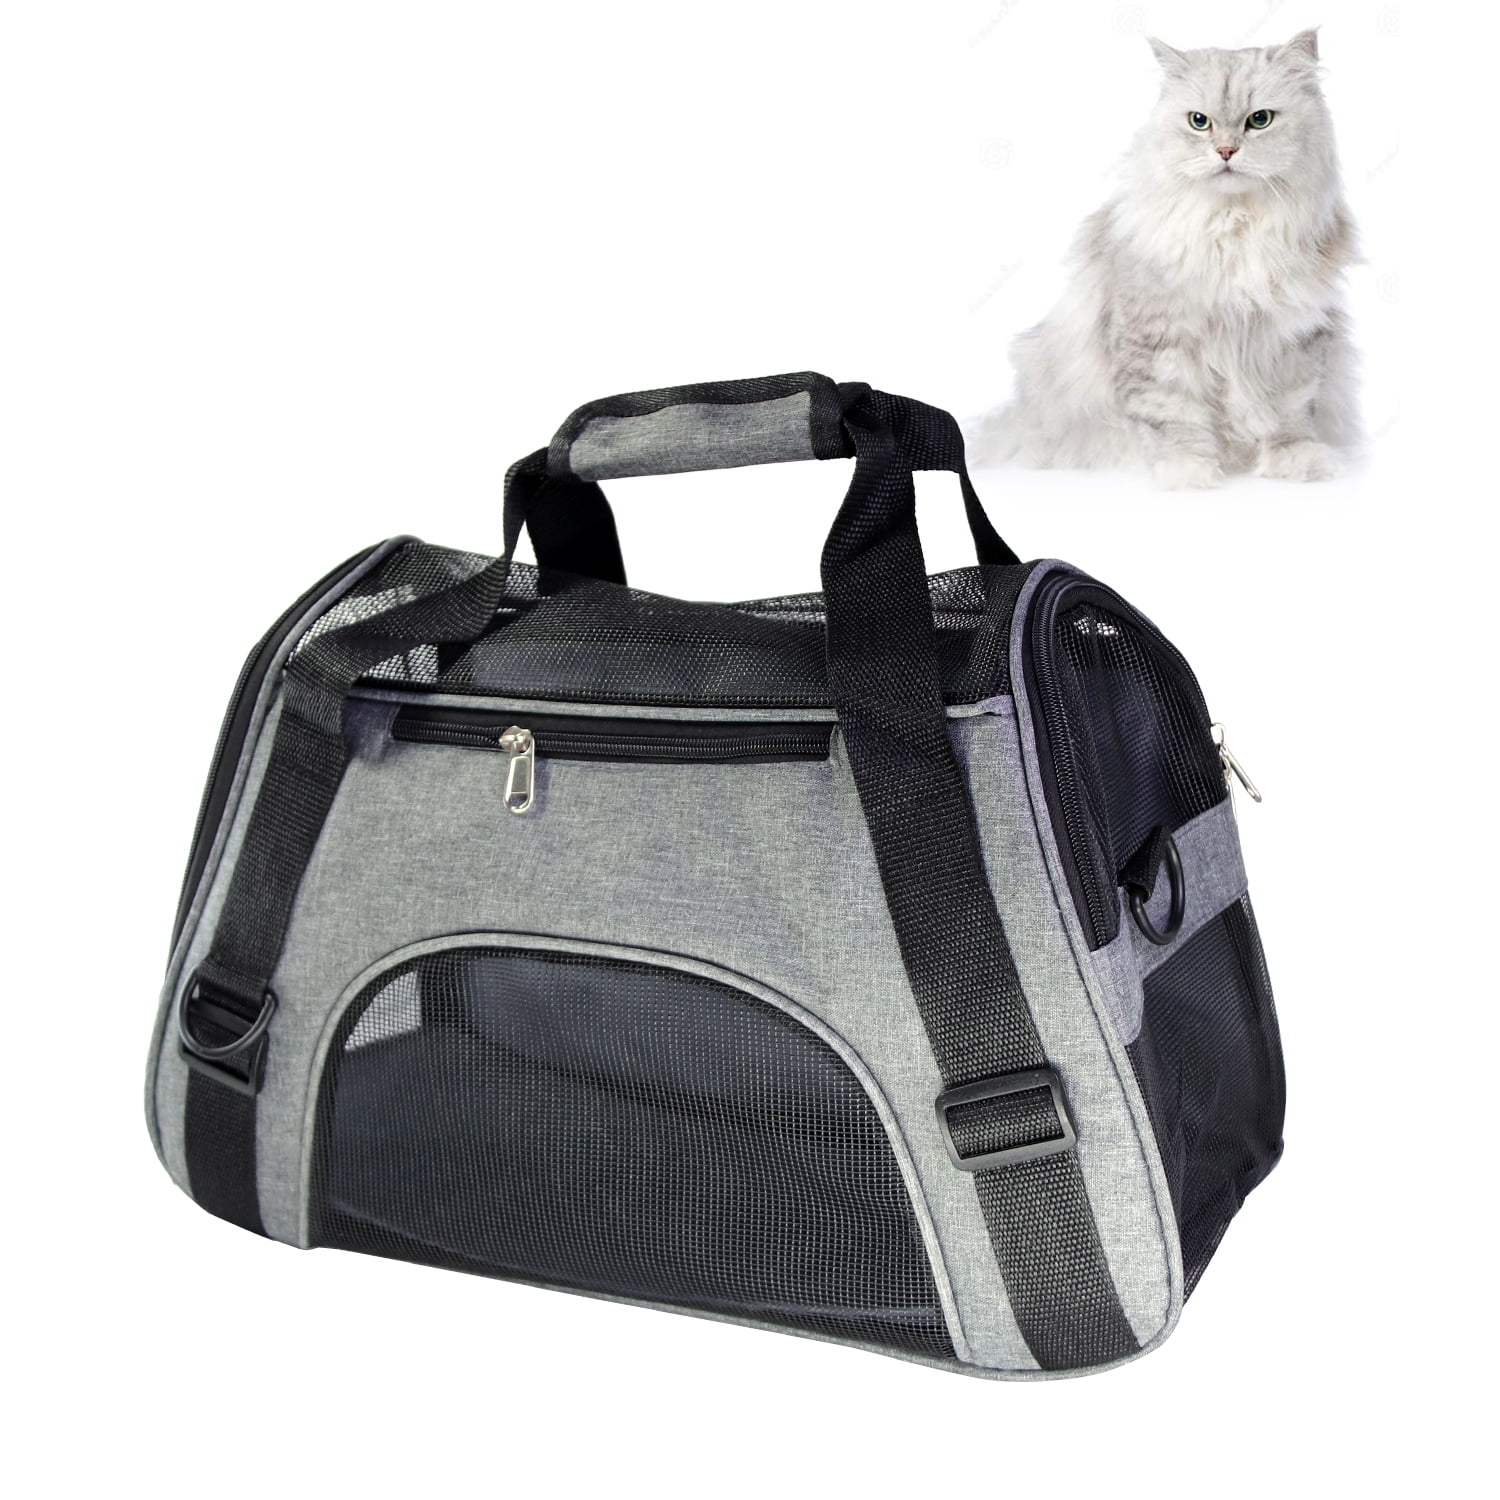 Refrze Pet Carrier Airline Approved, Cat Carriers for Medium Cats Small  Cats, Soft Dog Carriers for Small Dogs Medium Dogs, TSA Approved Pet  Carrier